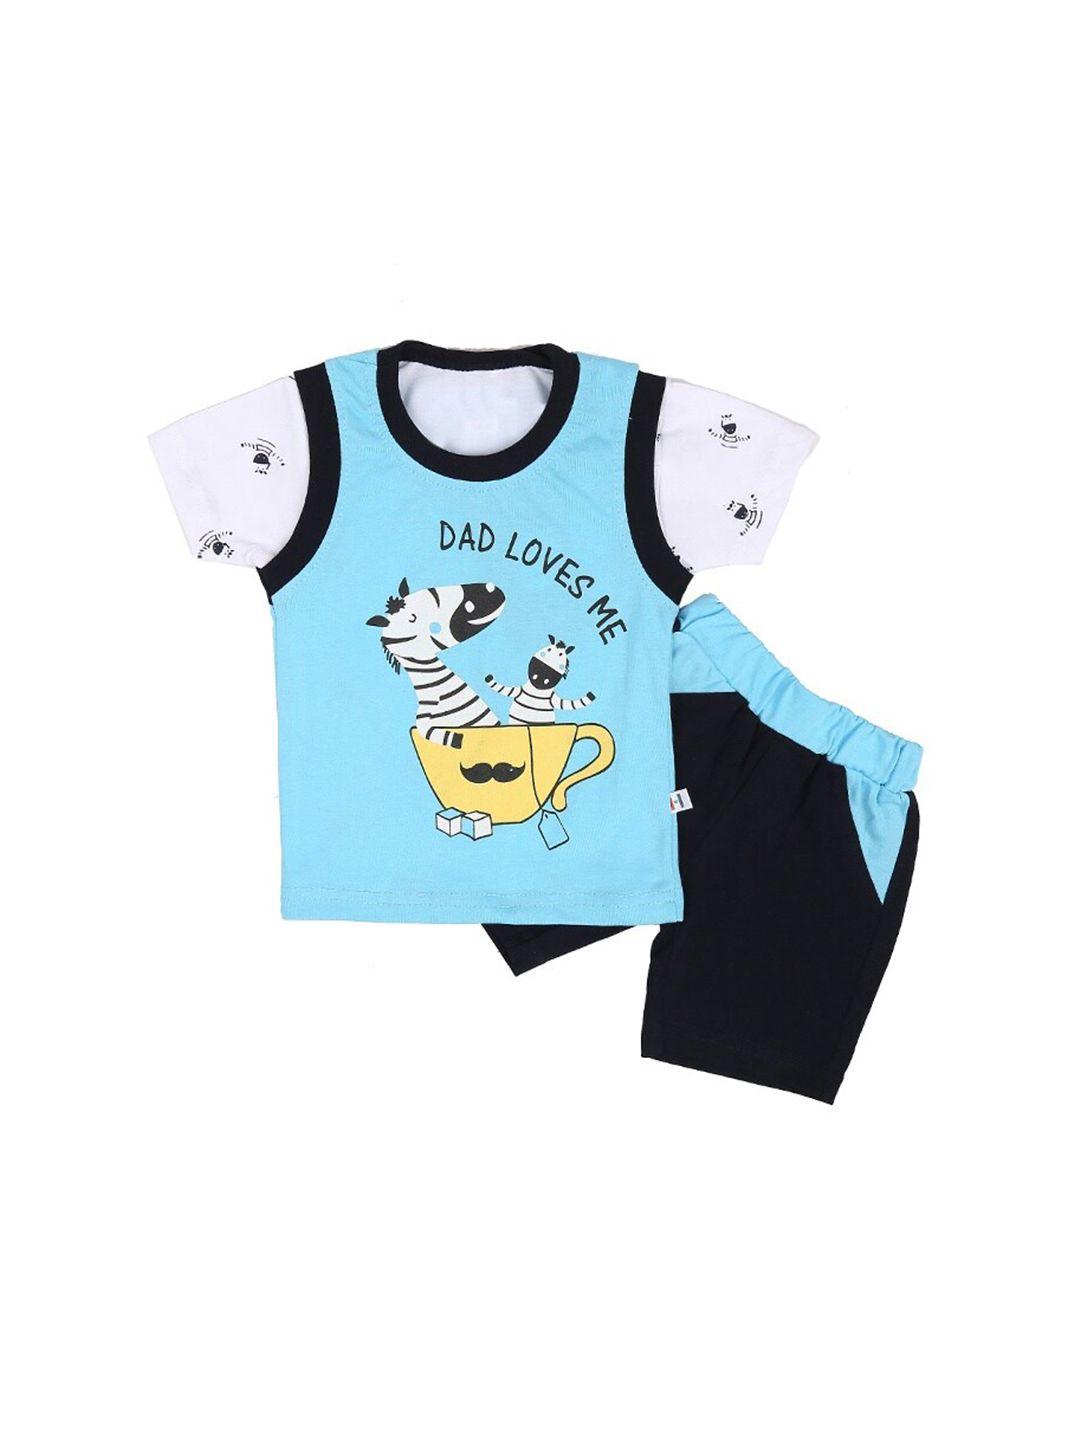 v-mart infants printed pure cotton t-shirt with shorts